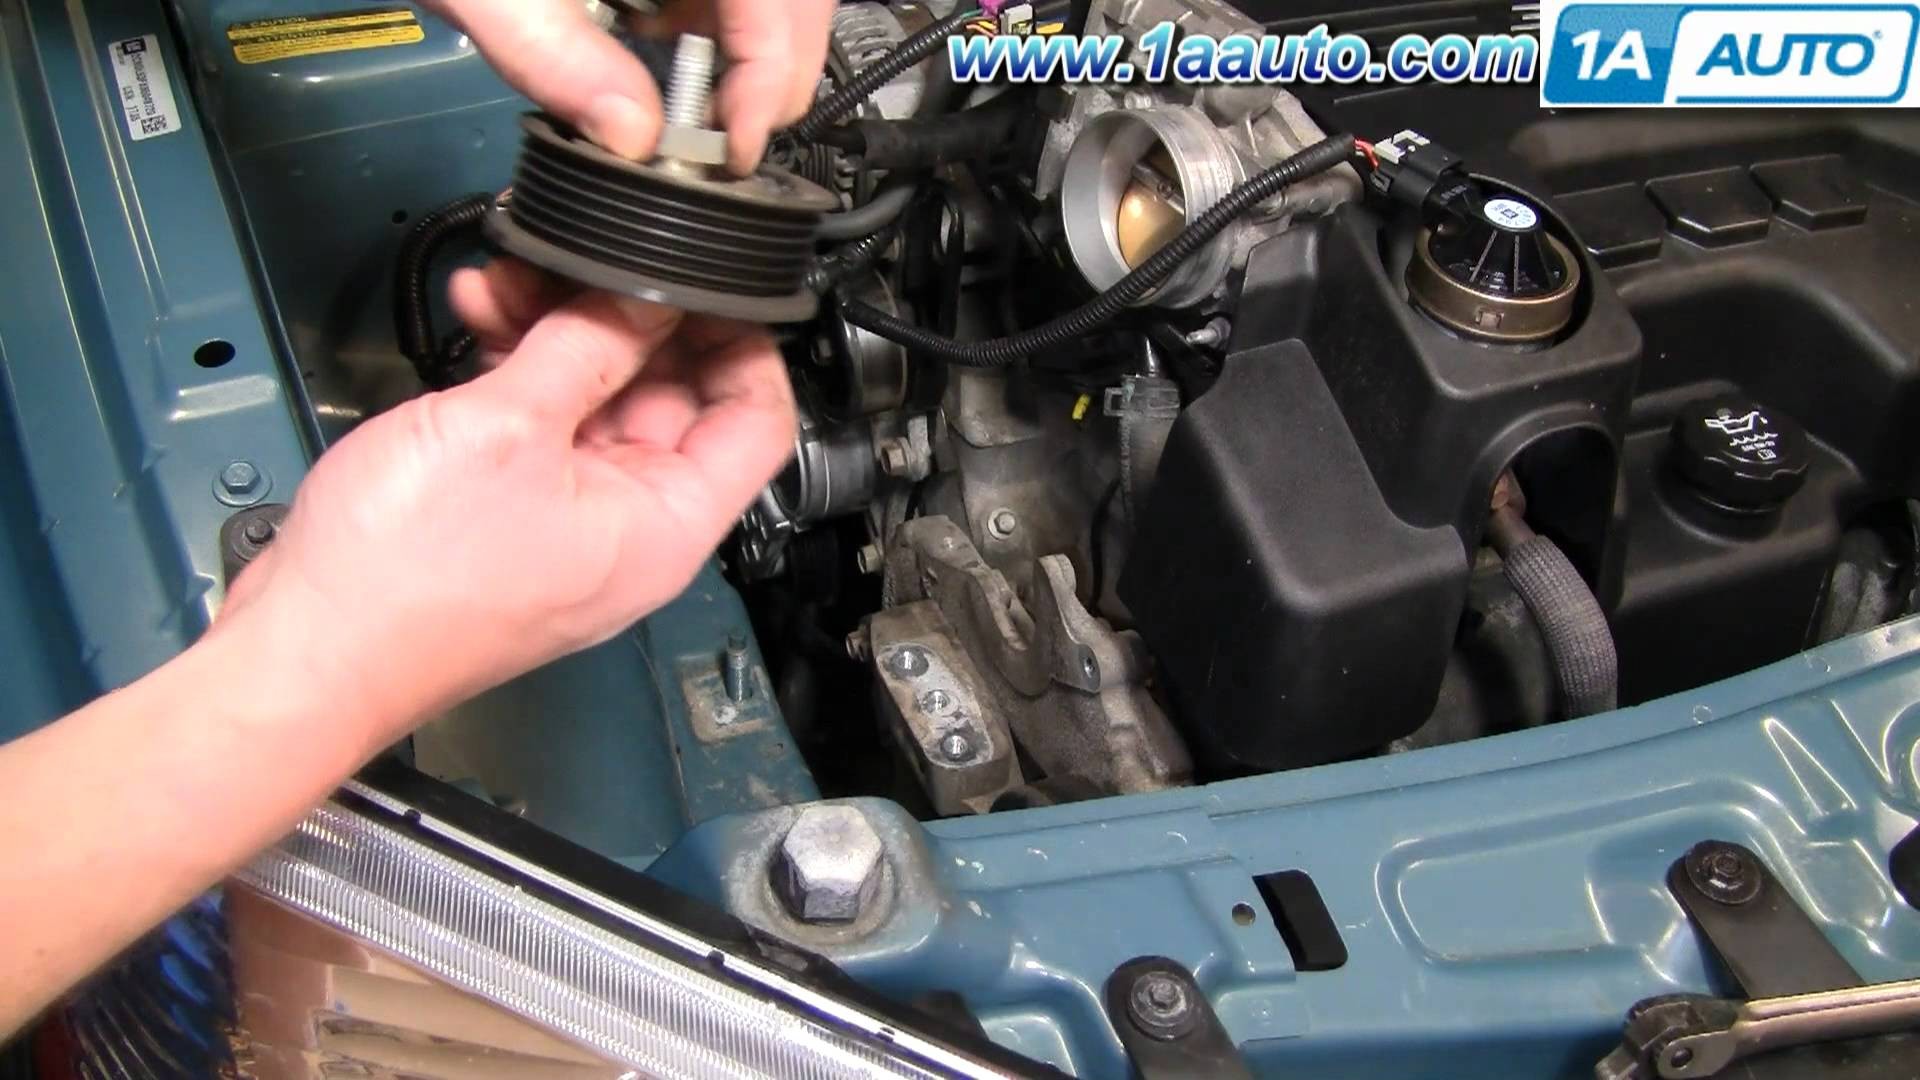 2006 Pontiac torrent Engine Diagram How to Install Replace Upper Idler Pulley Chevy Equinox 3 4l 05 09